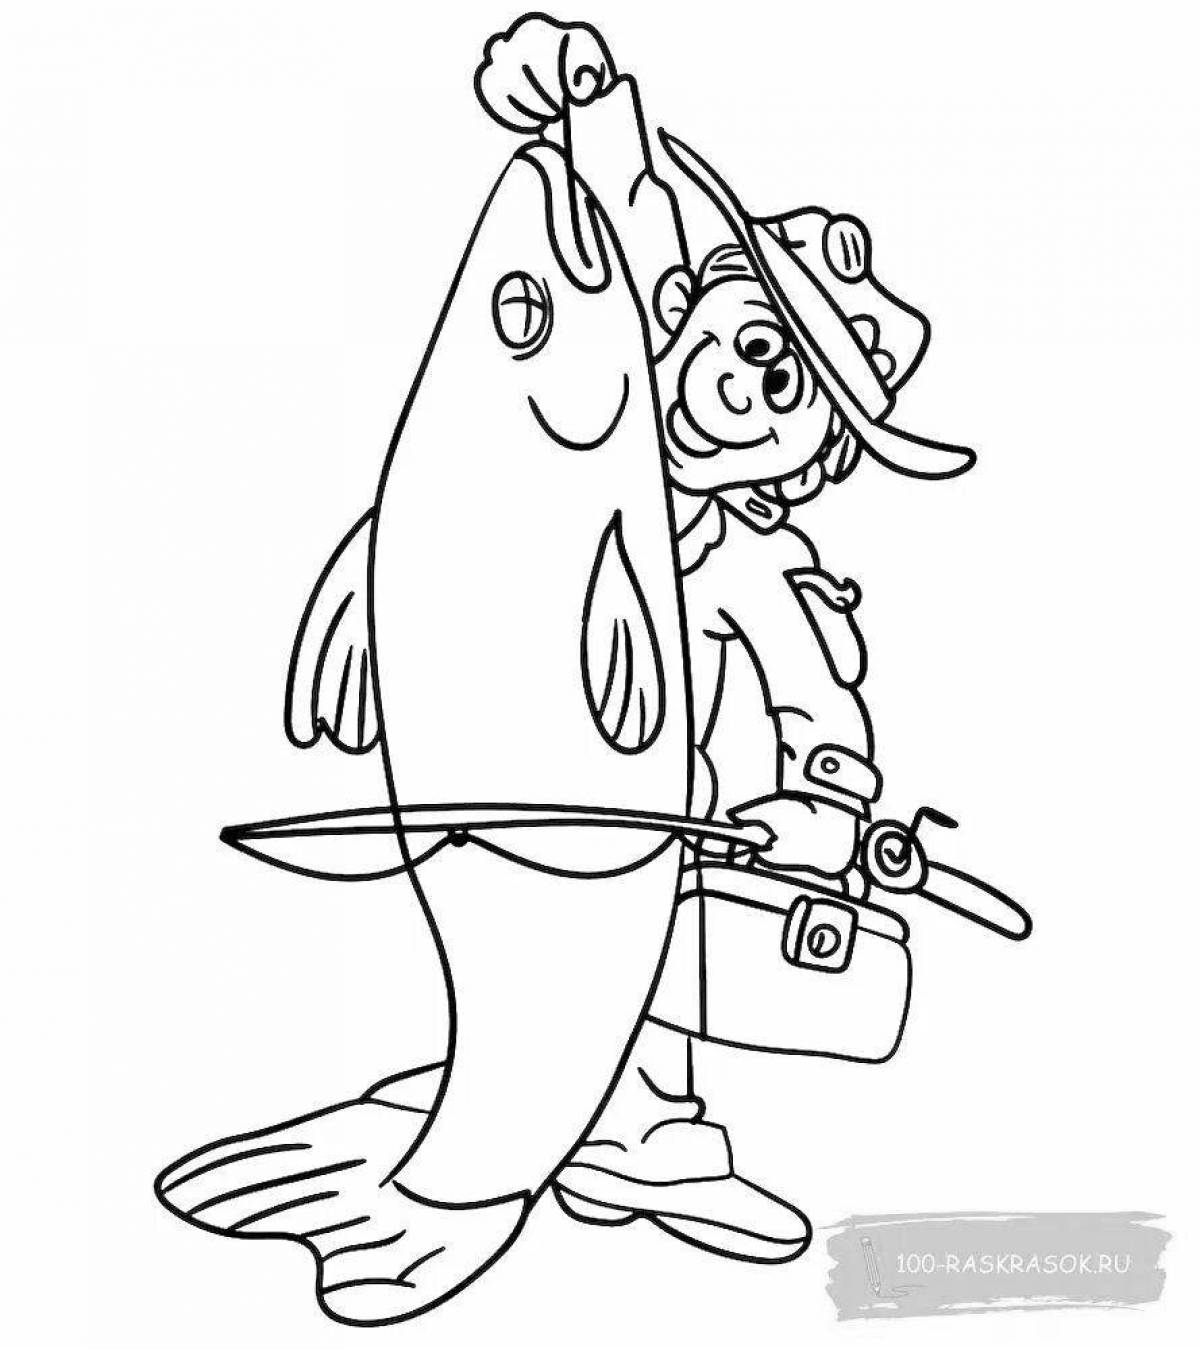 Amazing coloring pages of a fisherman for kids